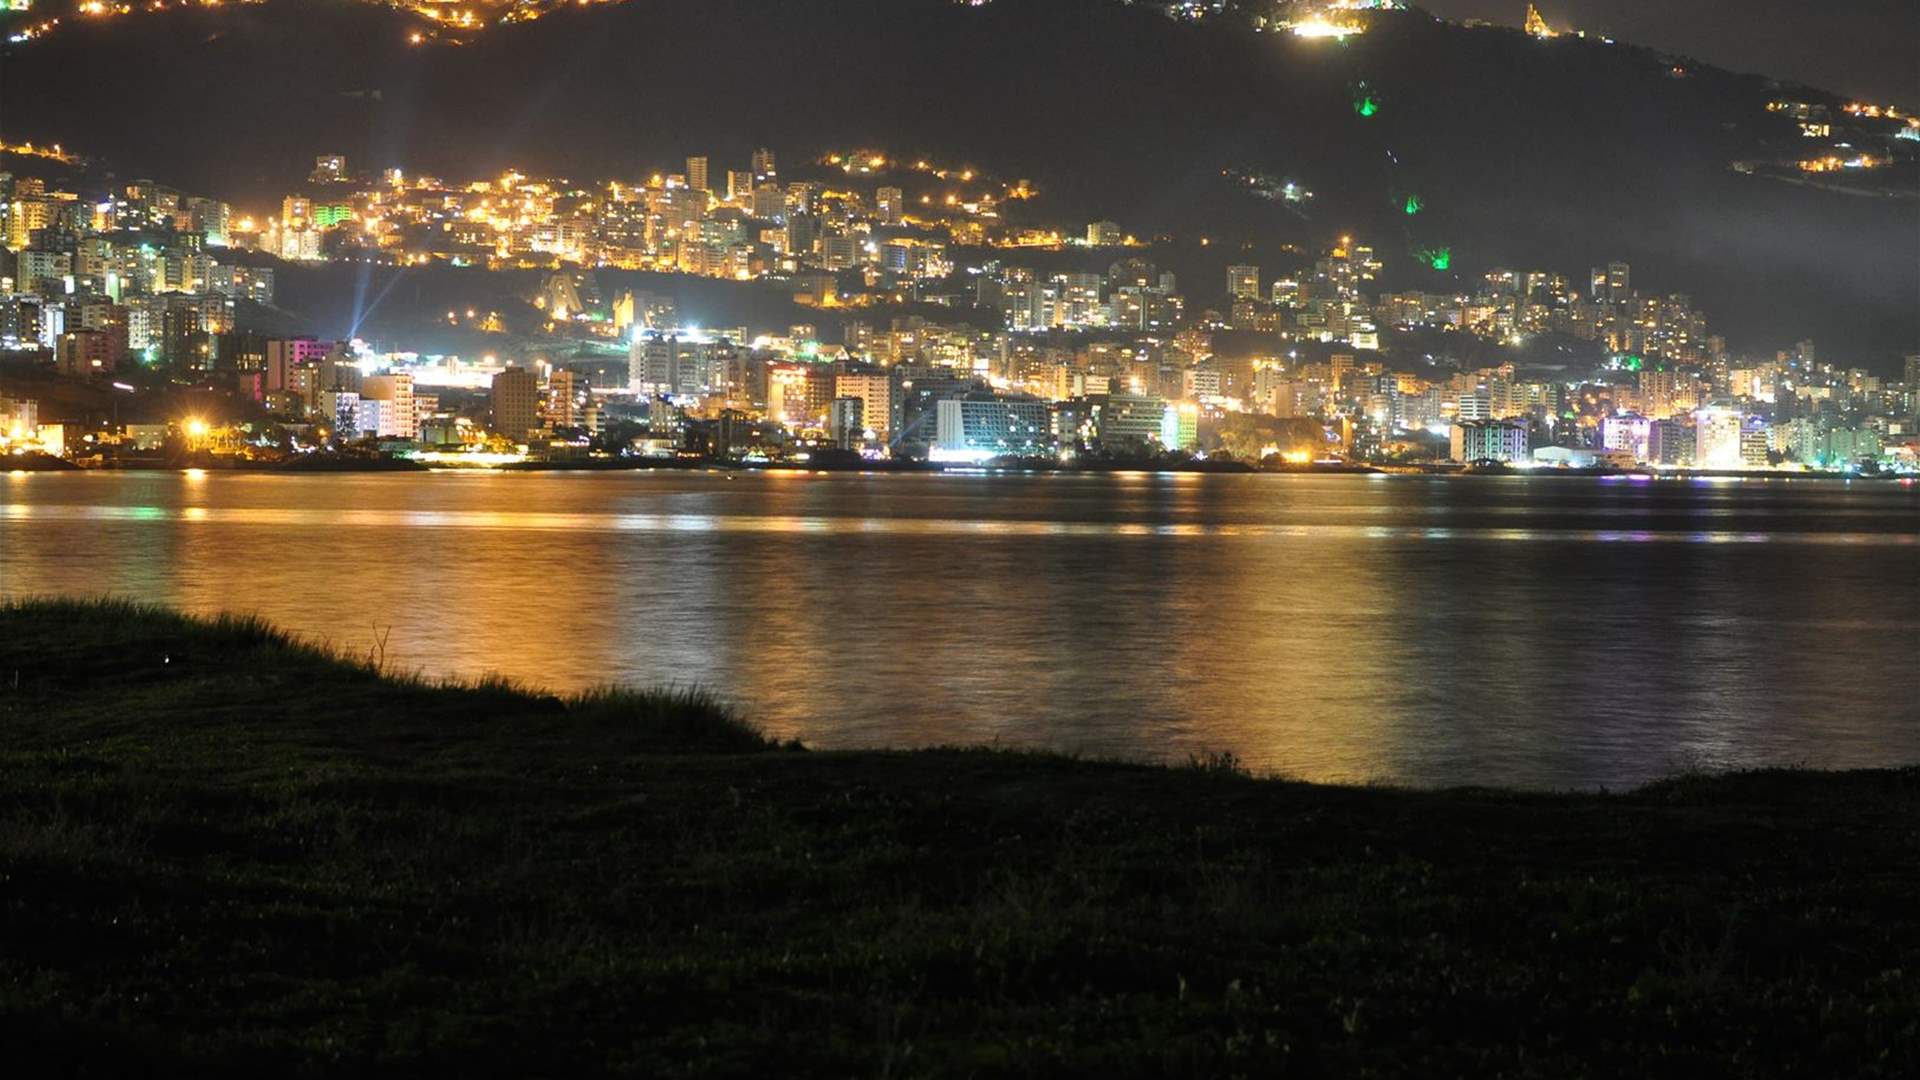 Armed robbery in Jounieh, suspect arrested after exchange of gunfire